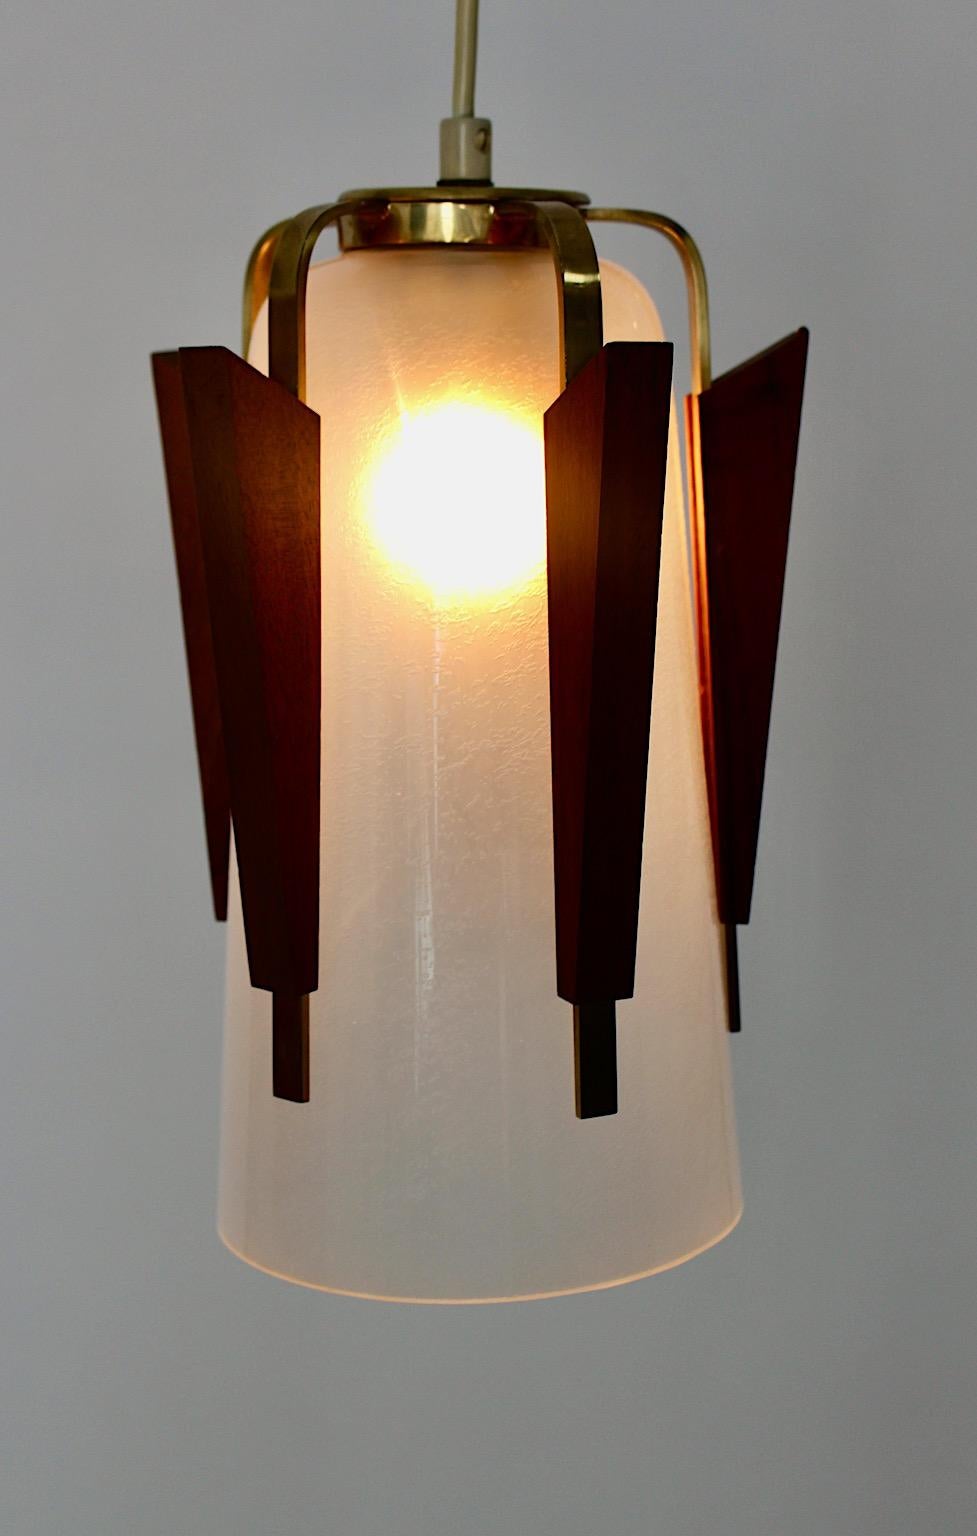 Scandinavian Modern vintage pendant or chandelier from brass, teak and frosted glass 1960s, Denmark.
A beautiful and graceful chandelier or pendant with frosted glass shade characterized through brass and teak elements.
One E 27 socket
Throughout